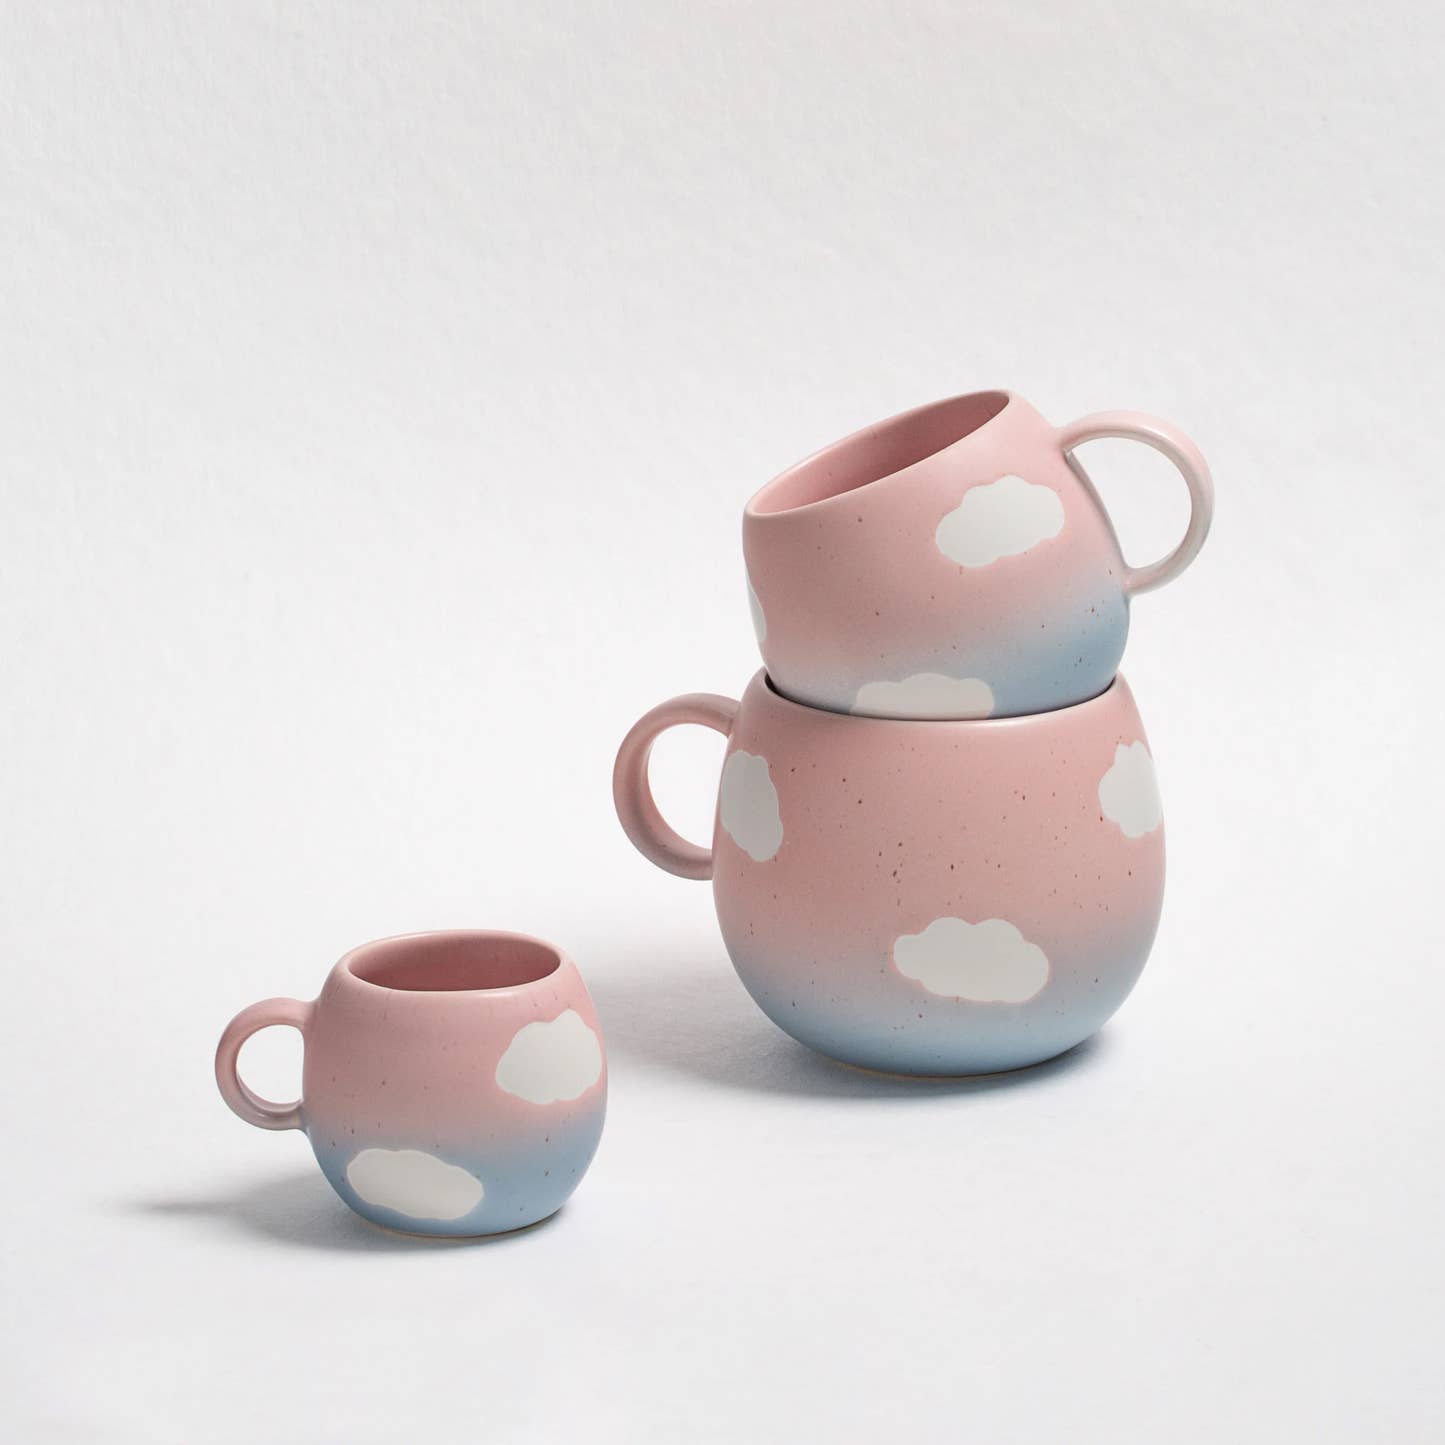 Egg Back Home Sunset Cloud Mugs in 3 different sizes